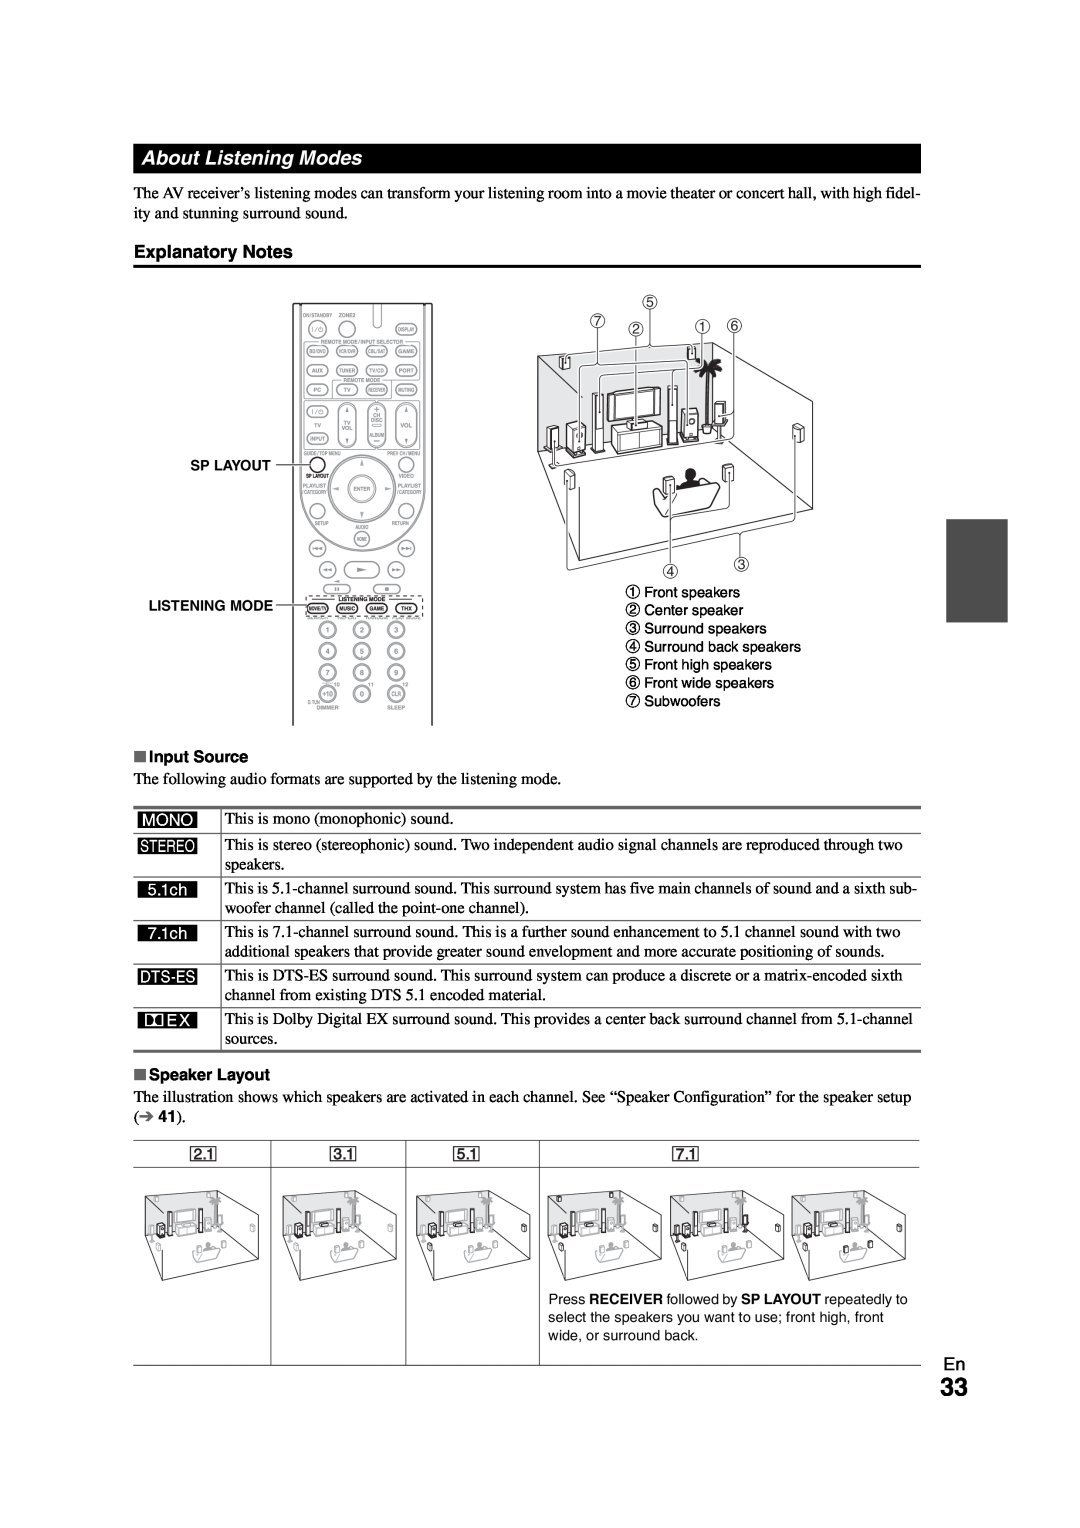 Onkyo SR608 instruction manual About Listening Modes, Explanatory Notes, Input Source, Speaker Layout 